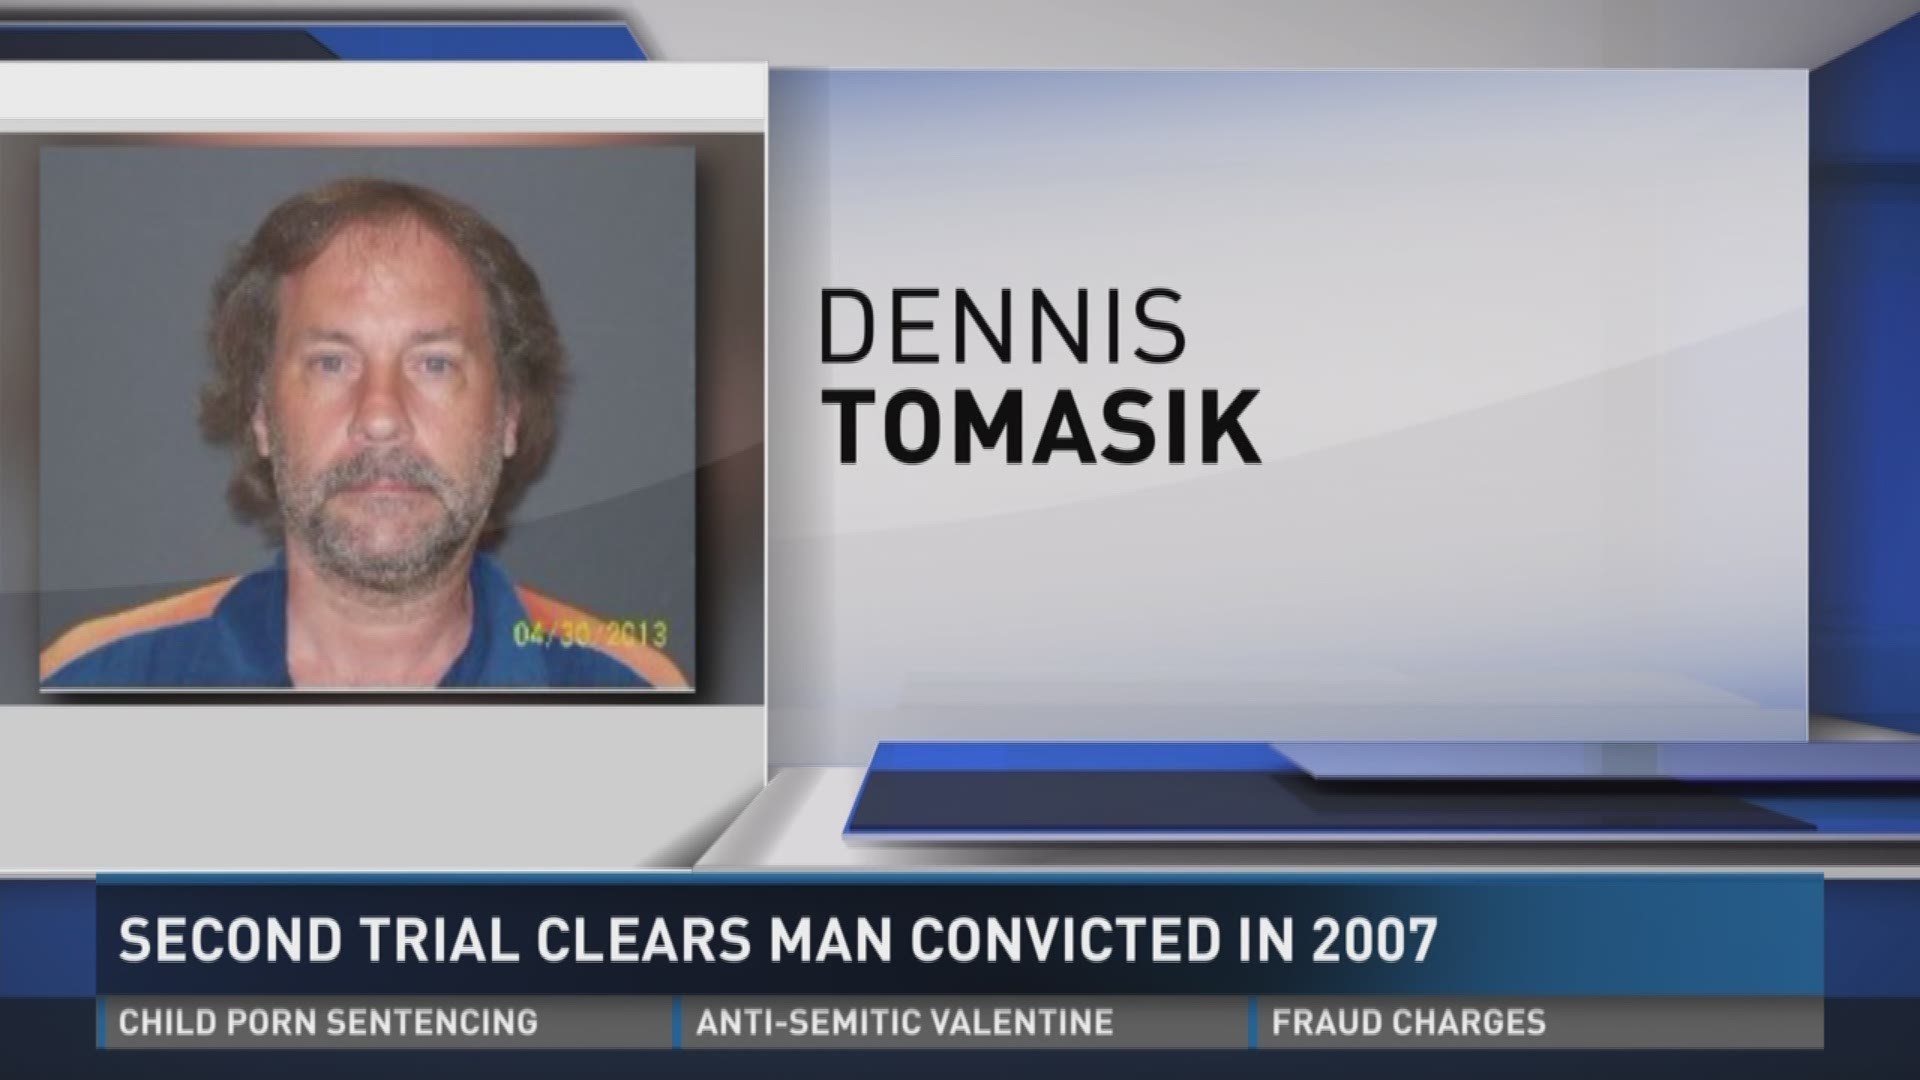 Second trial clears man convicted in 2007